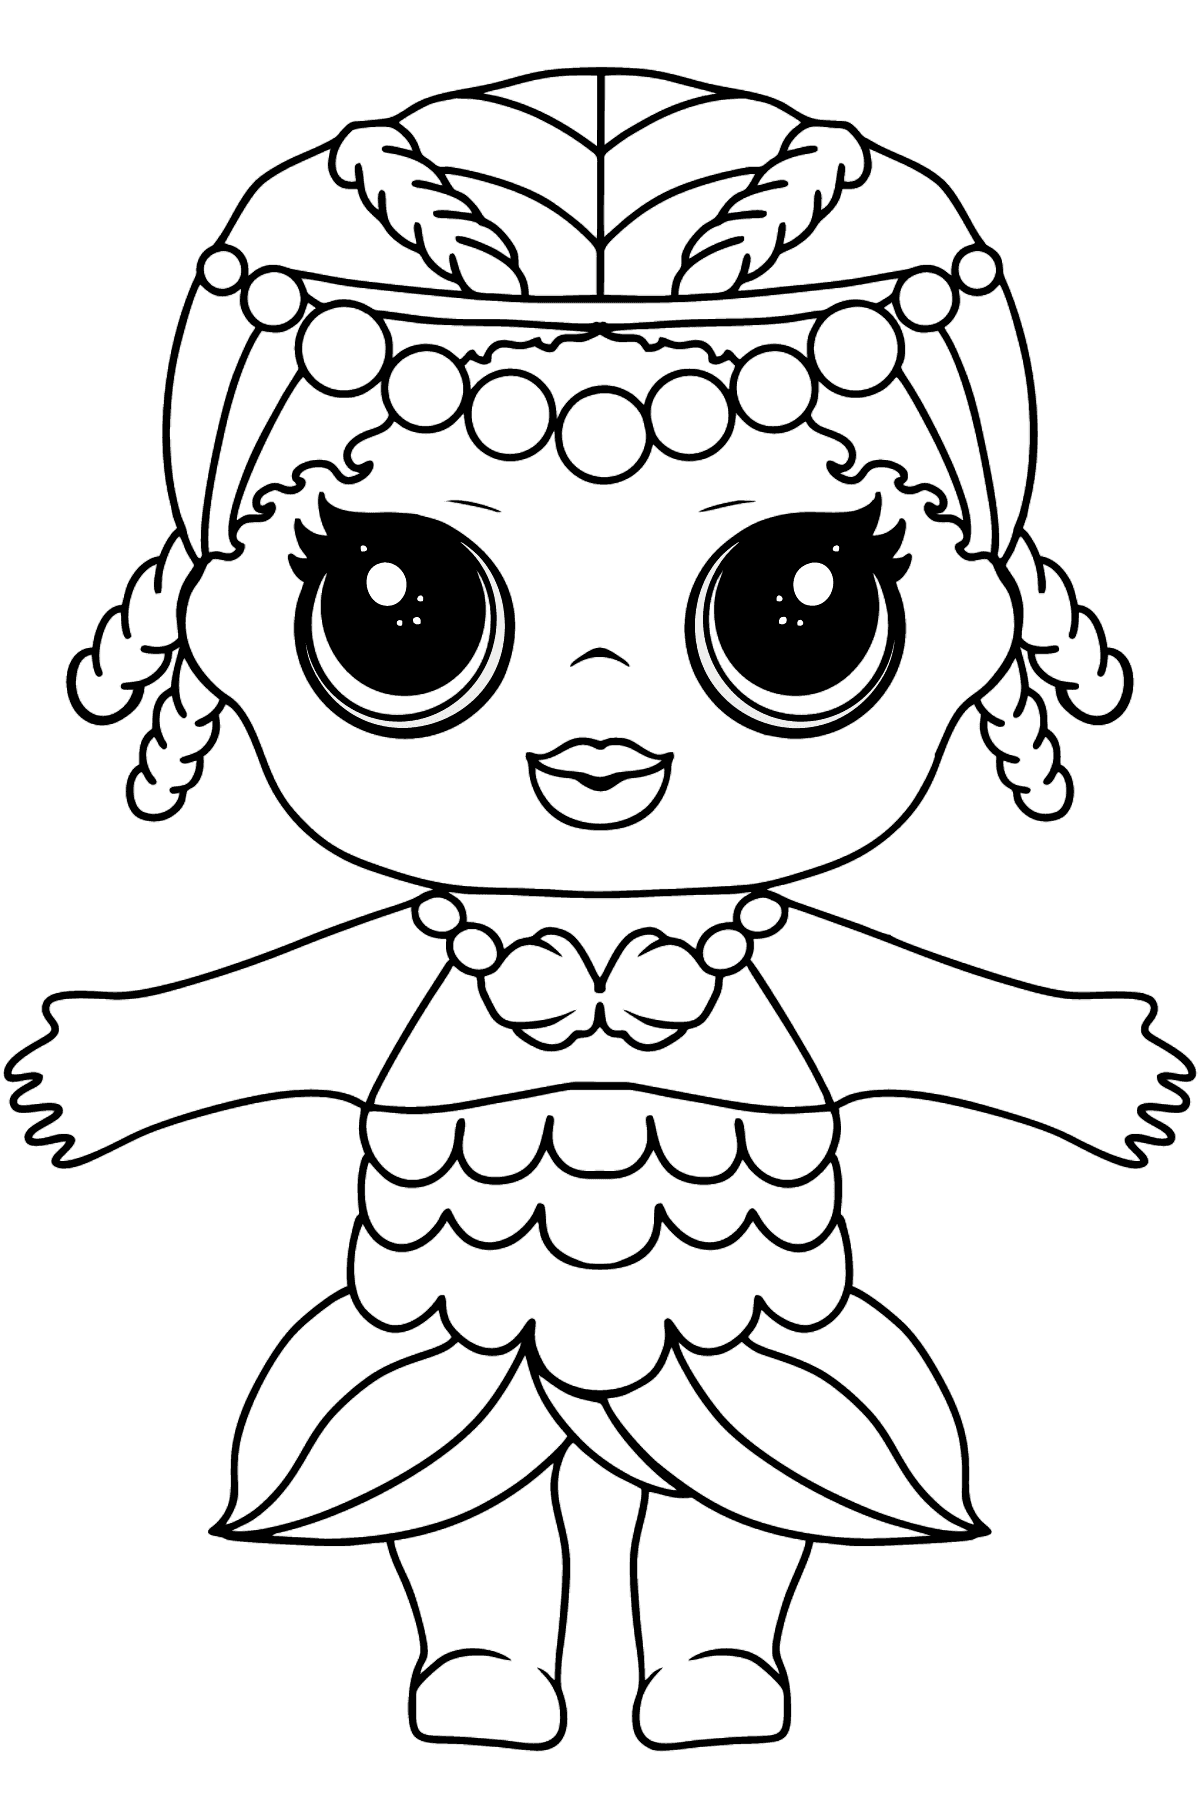 LOL Surprise Doll Merbaby Coloring page ♥ Online and Print for Free!